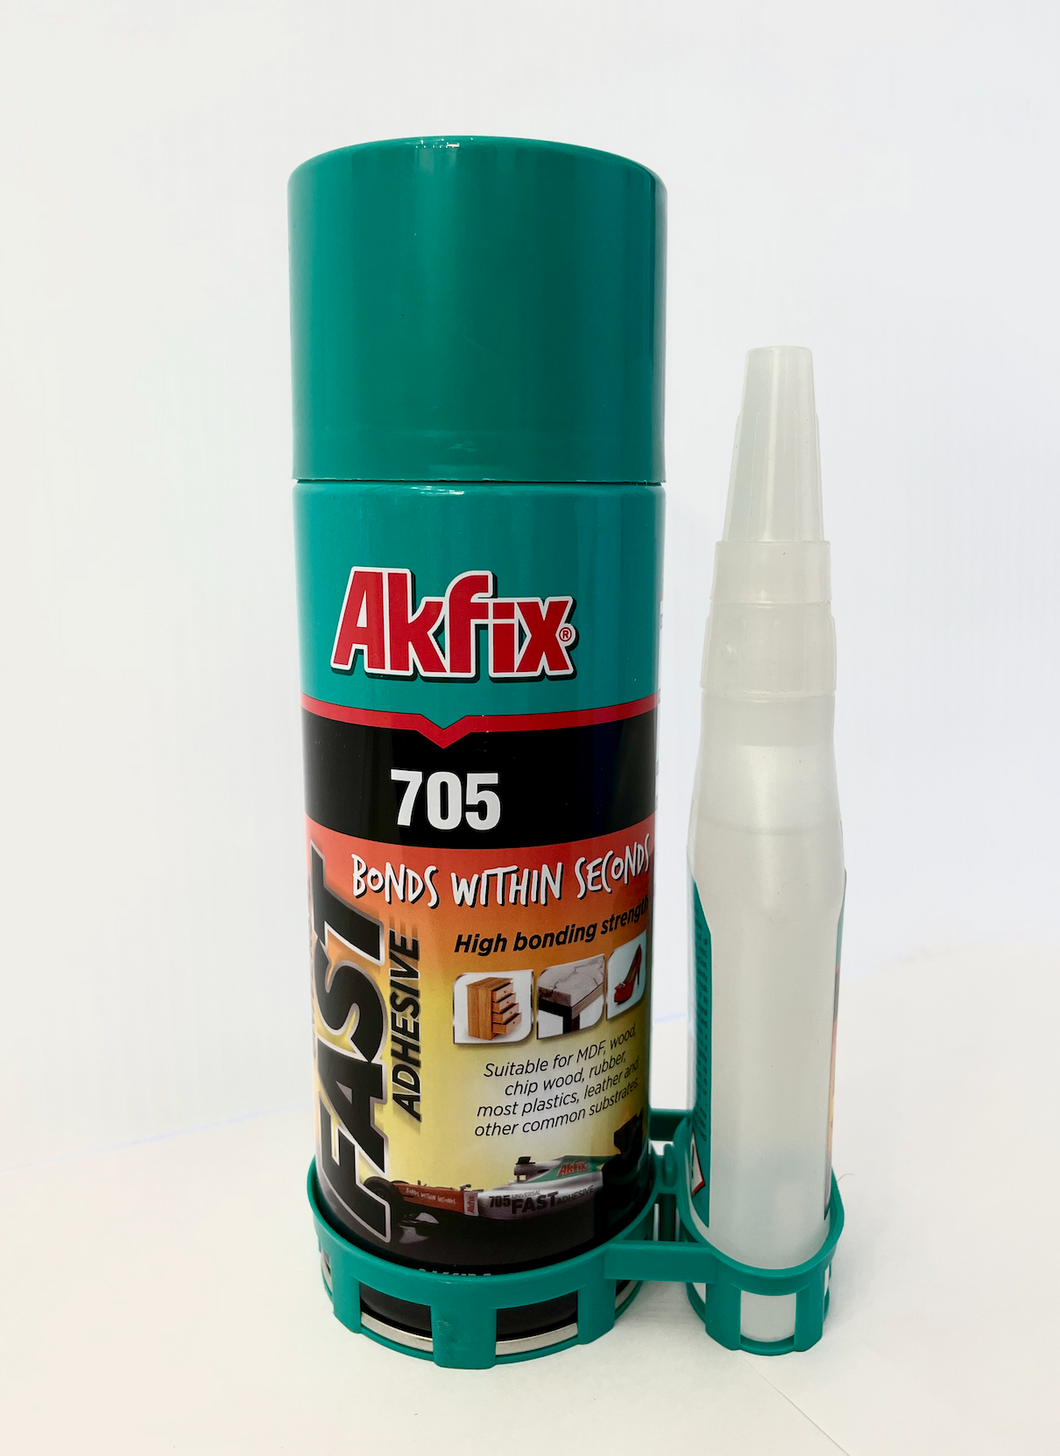 Akfix universal fast adhesive: a multi-purpose product, has a high bonding strength and is suitable for bonding a variety of materials, therefore perfect for woodworkers.  This product is great for filling in small holes, and the spray activator allows it to dry in seconds, allowing you to continue working with it right away.   Properties High bonding strength. Suitable for use on vertical surfaces as it will not drip or slump. It is particularly suited to bonding difficult substrates which have a porous or